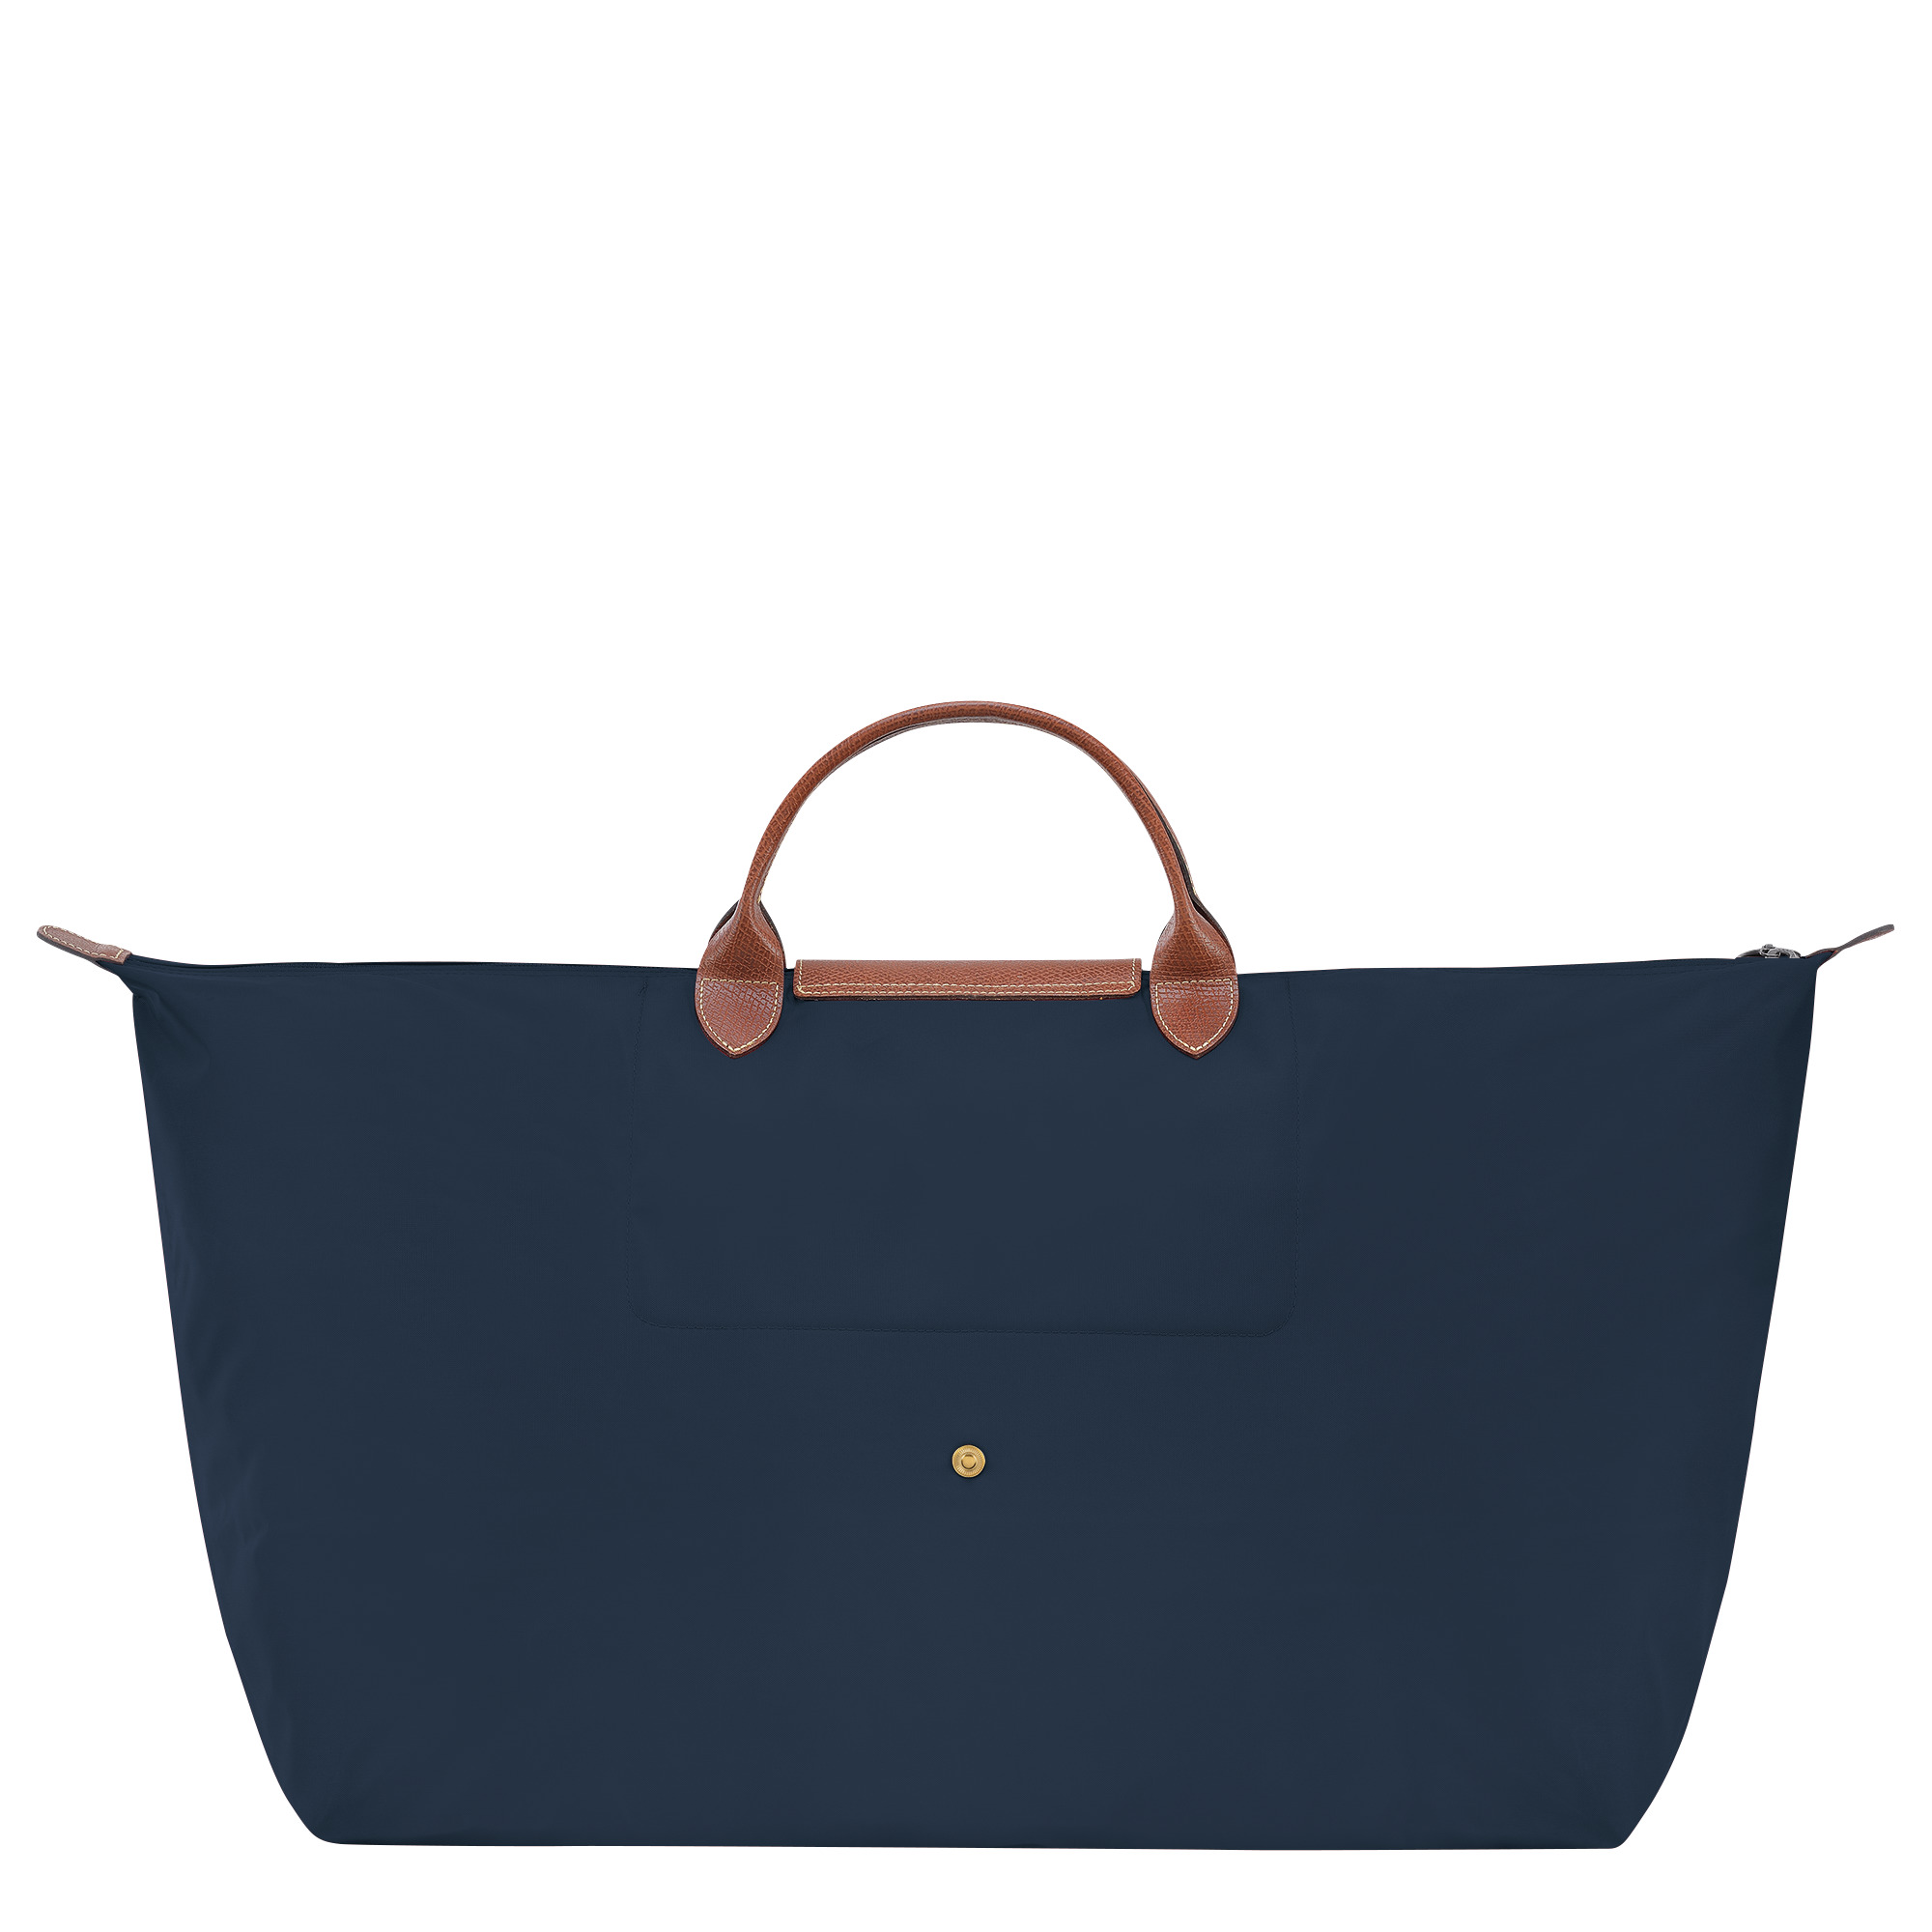 Le Pliage Original M Travel bag Navy - Recycled canvas - 4